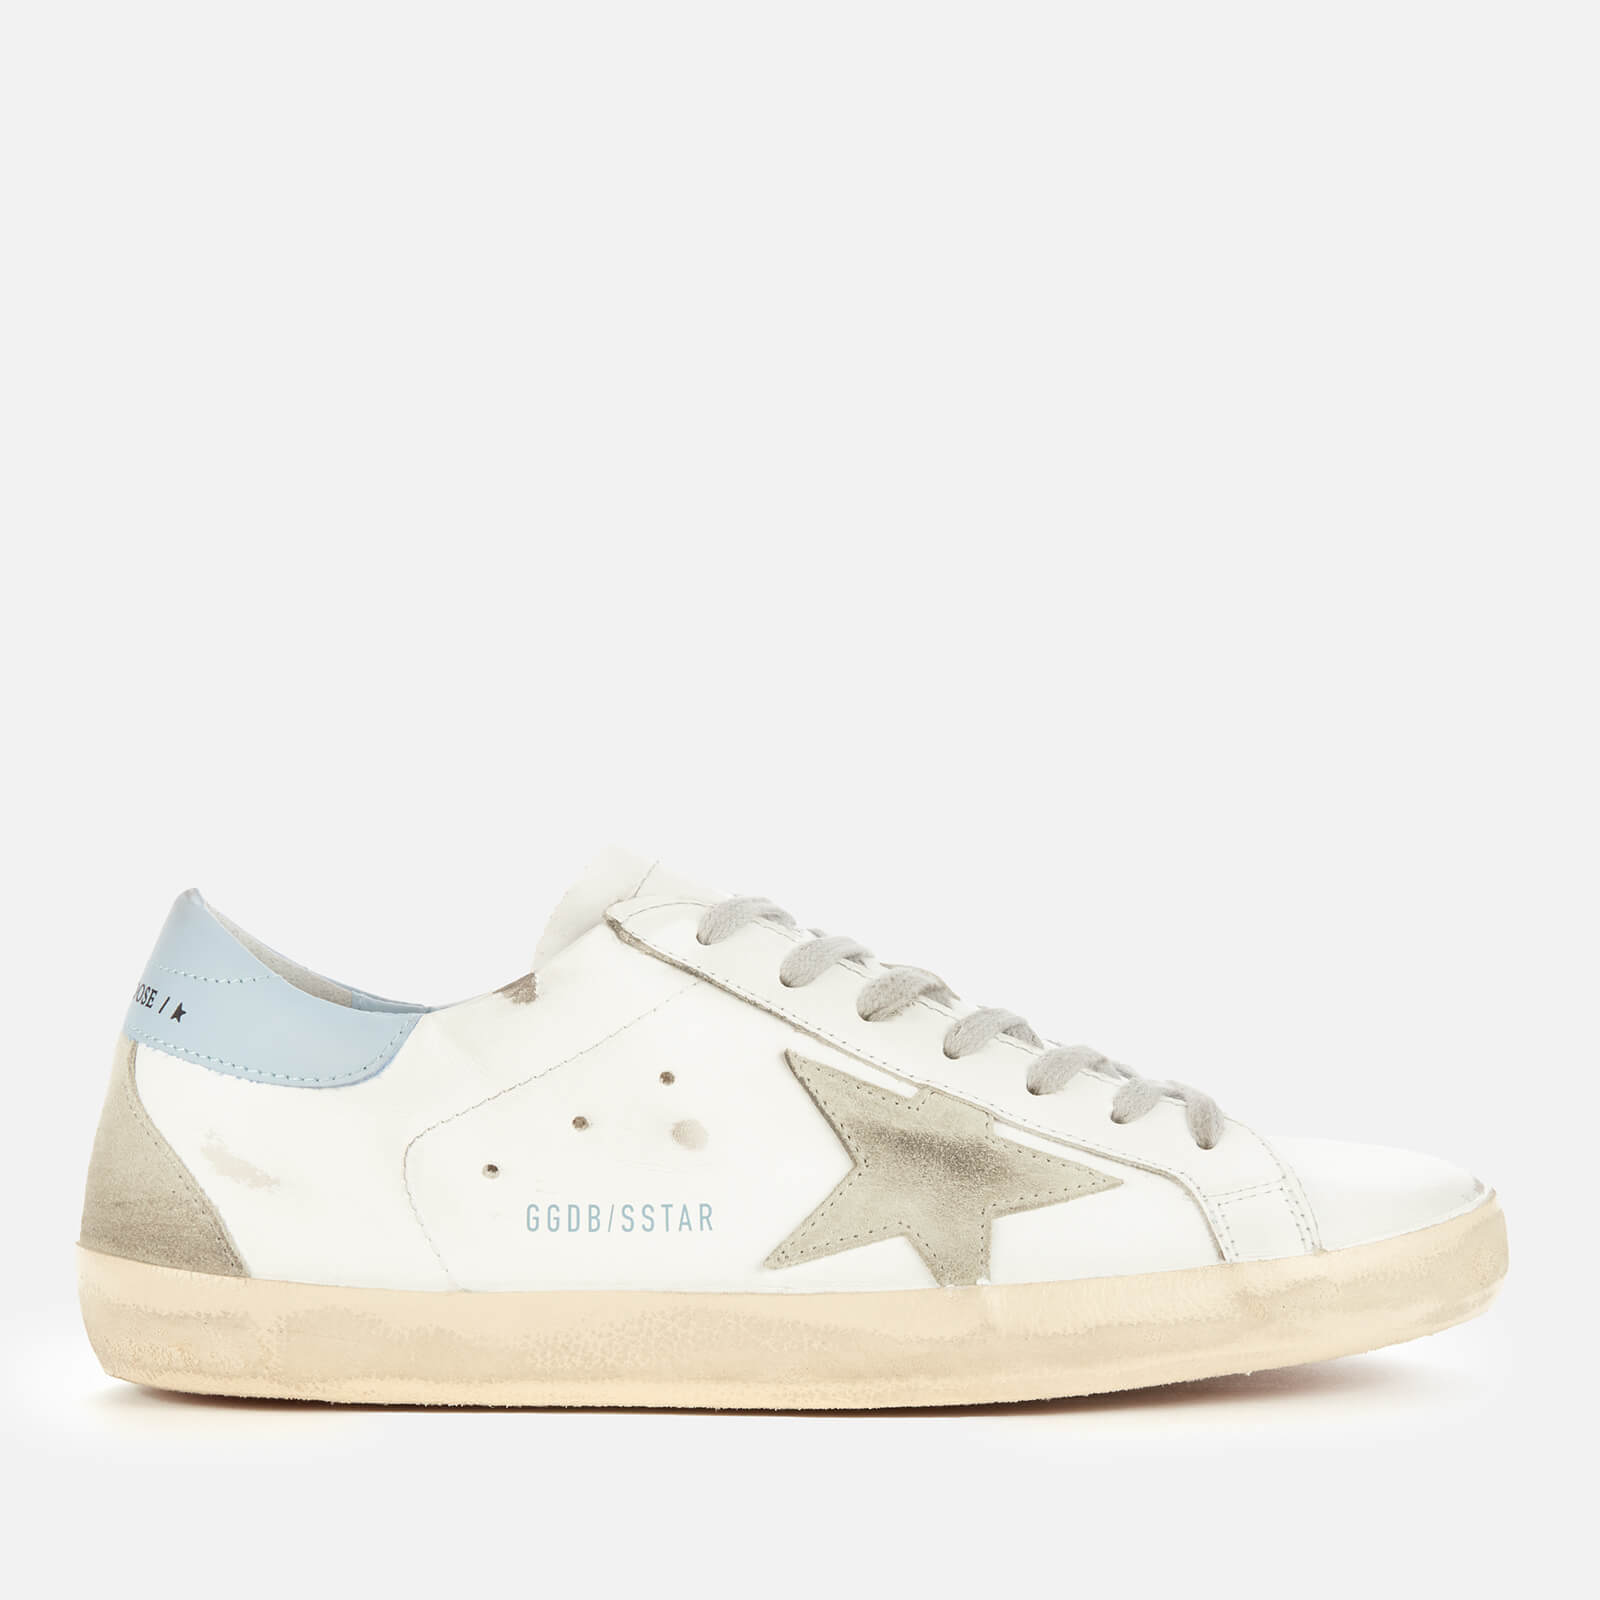 Golden Goose Deluxe Brand Men's Superstar Leather Trainers - White/Ice/Powder Blue - UK 7